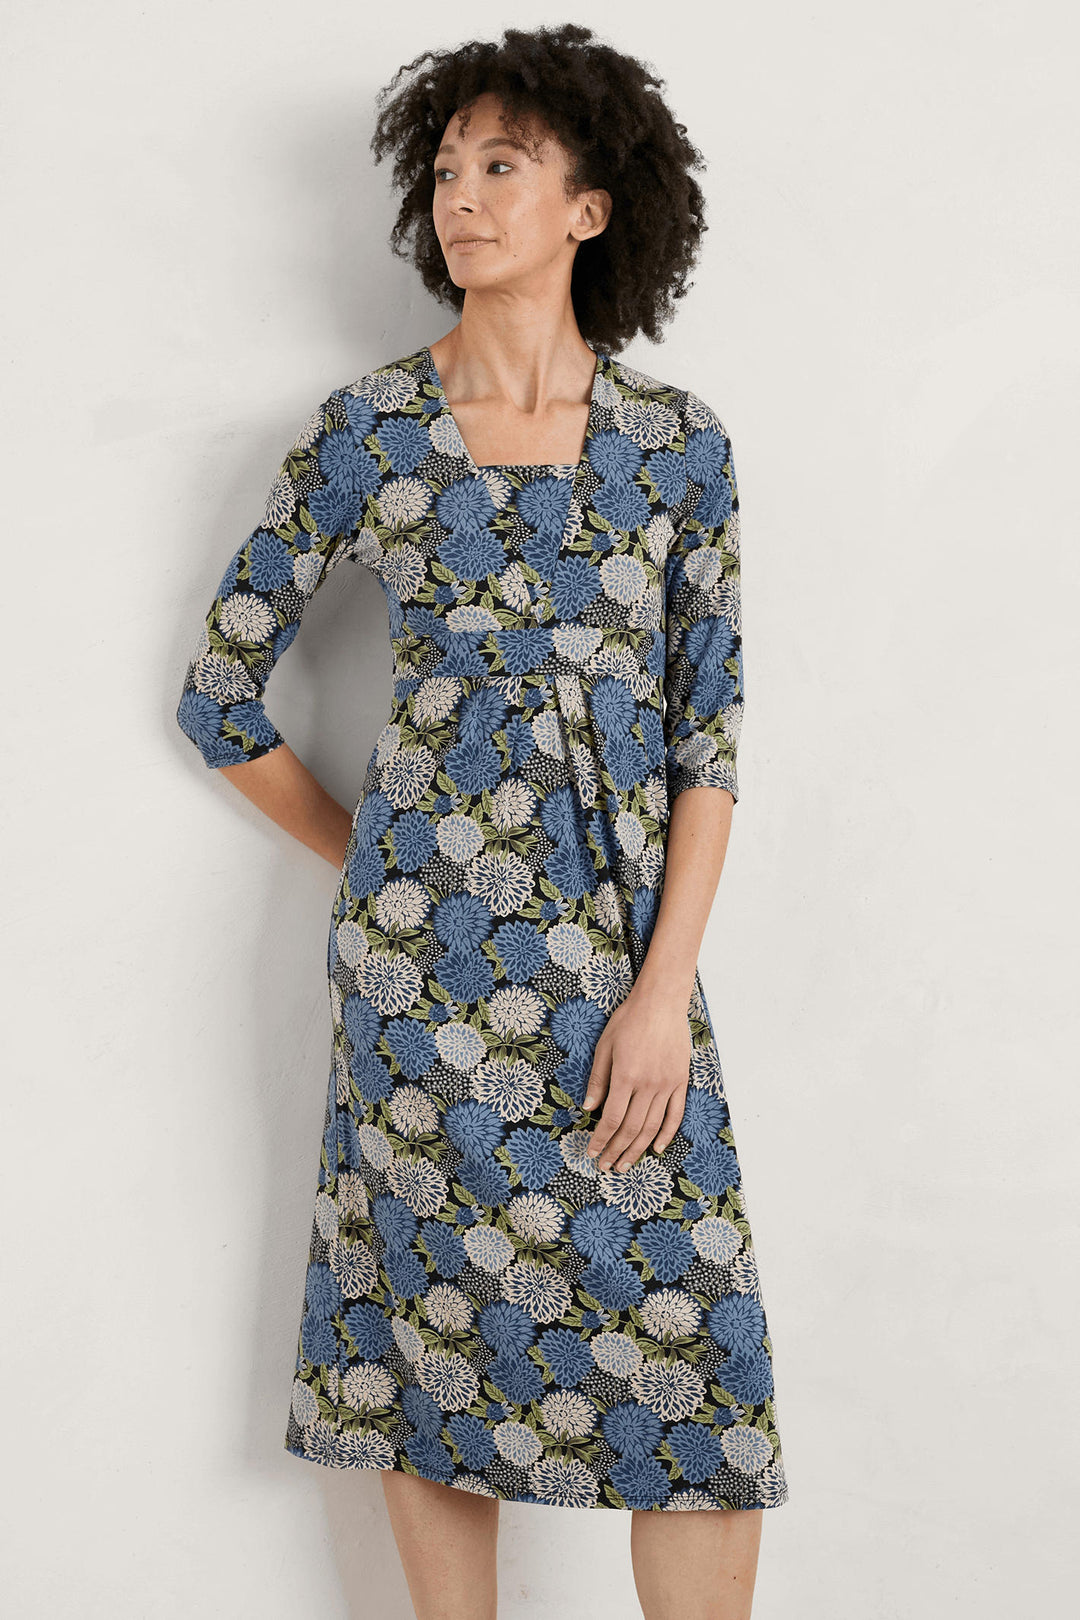 Seasalt 130 Onyx Blue Seed Packet Dahlia Bed Tide Dress - Shirley Allum Boutique